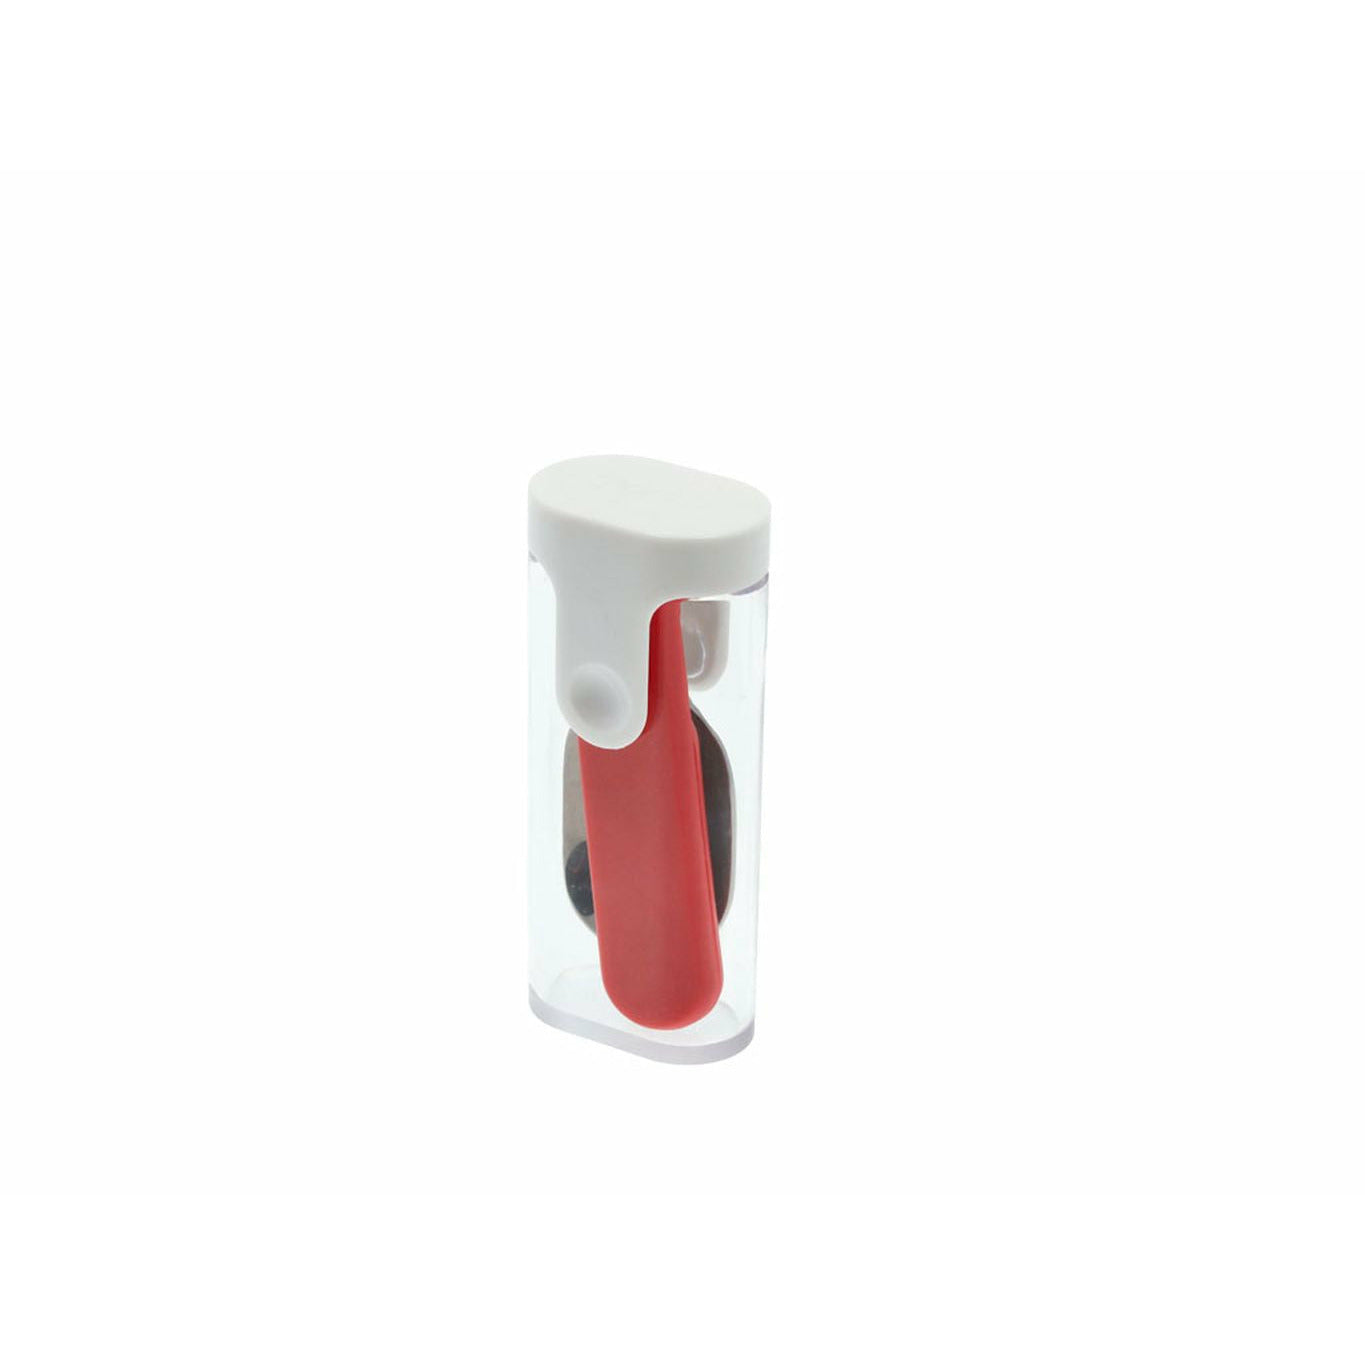 Mepal Ellipse Polable Spoon, Nordic Red